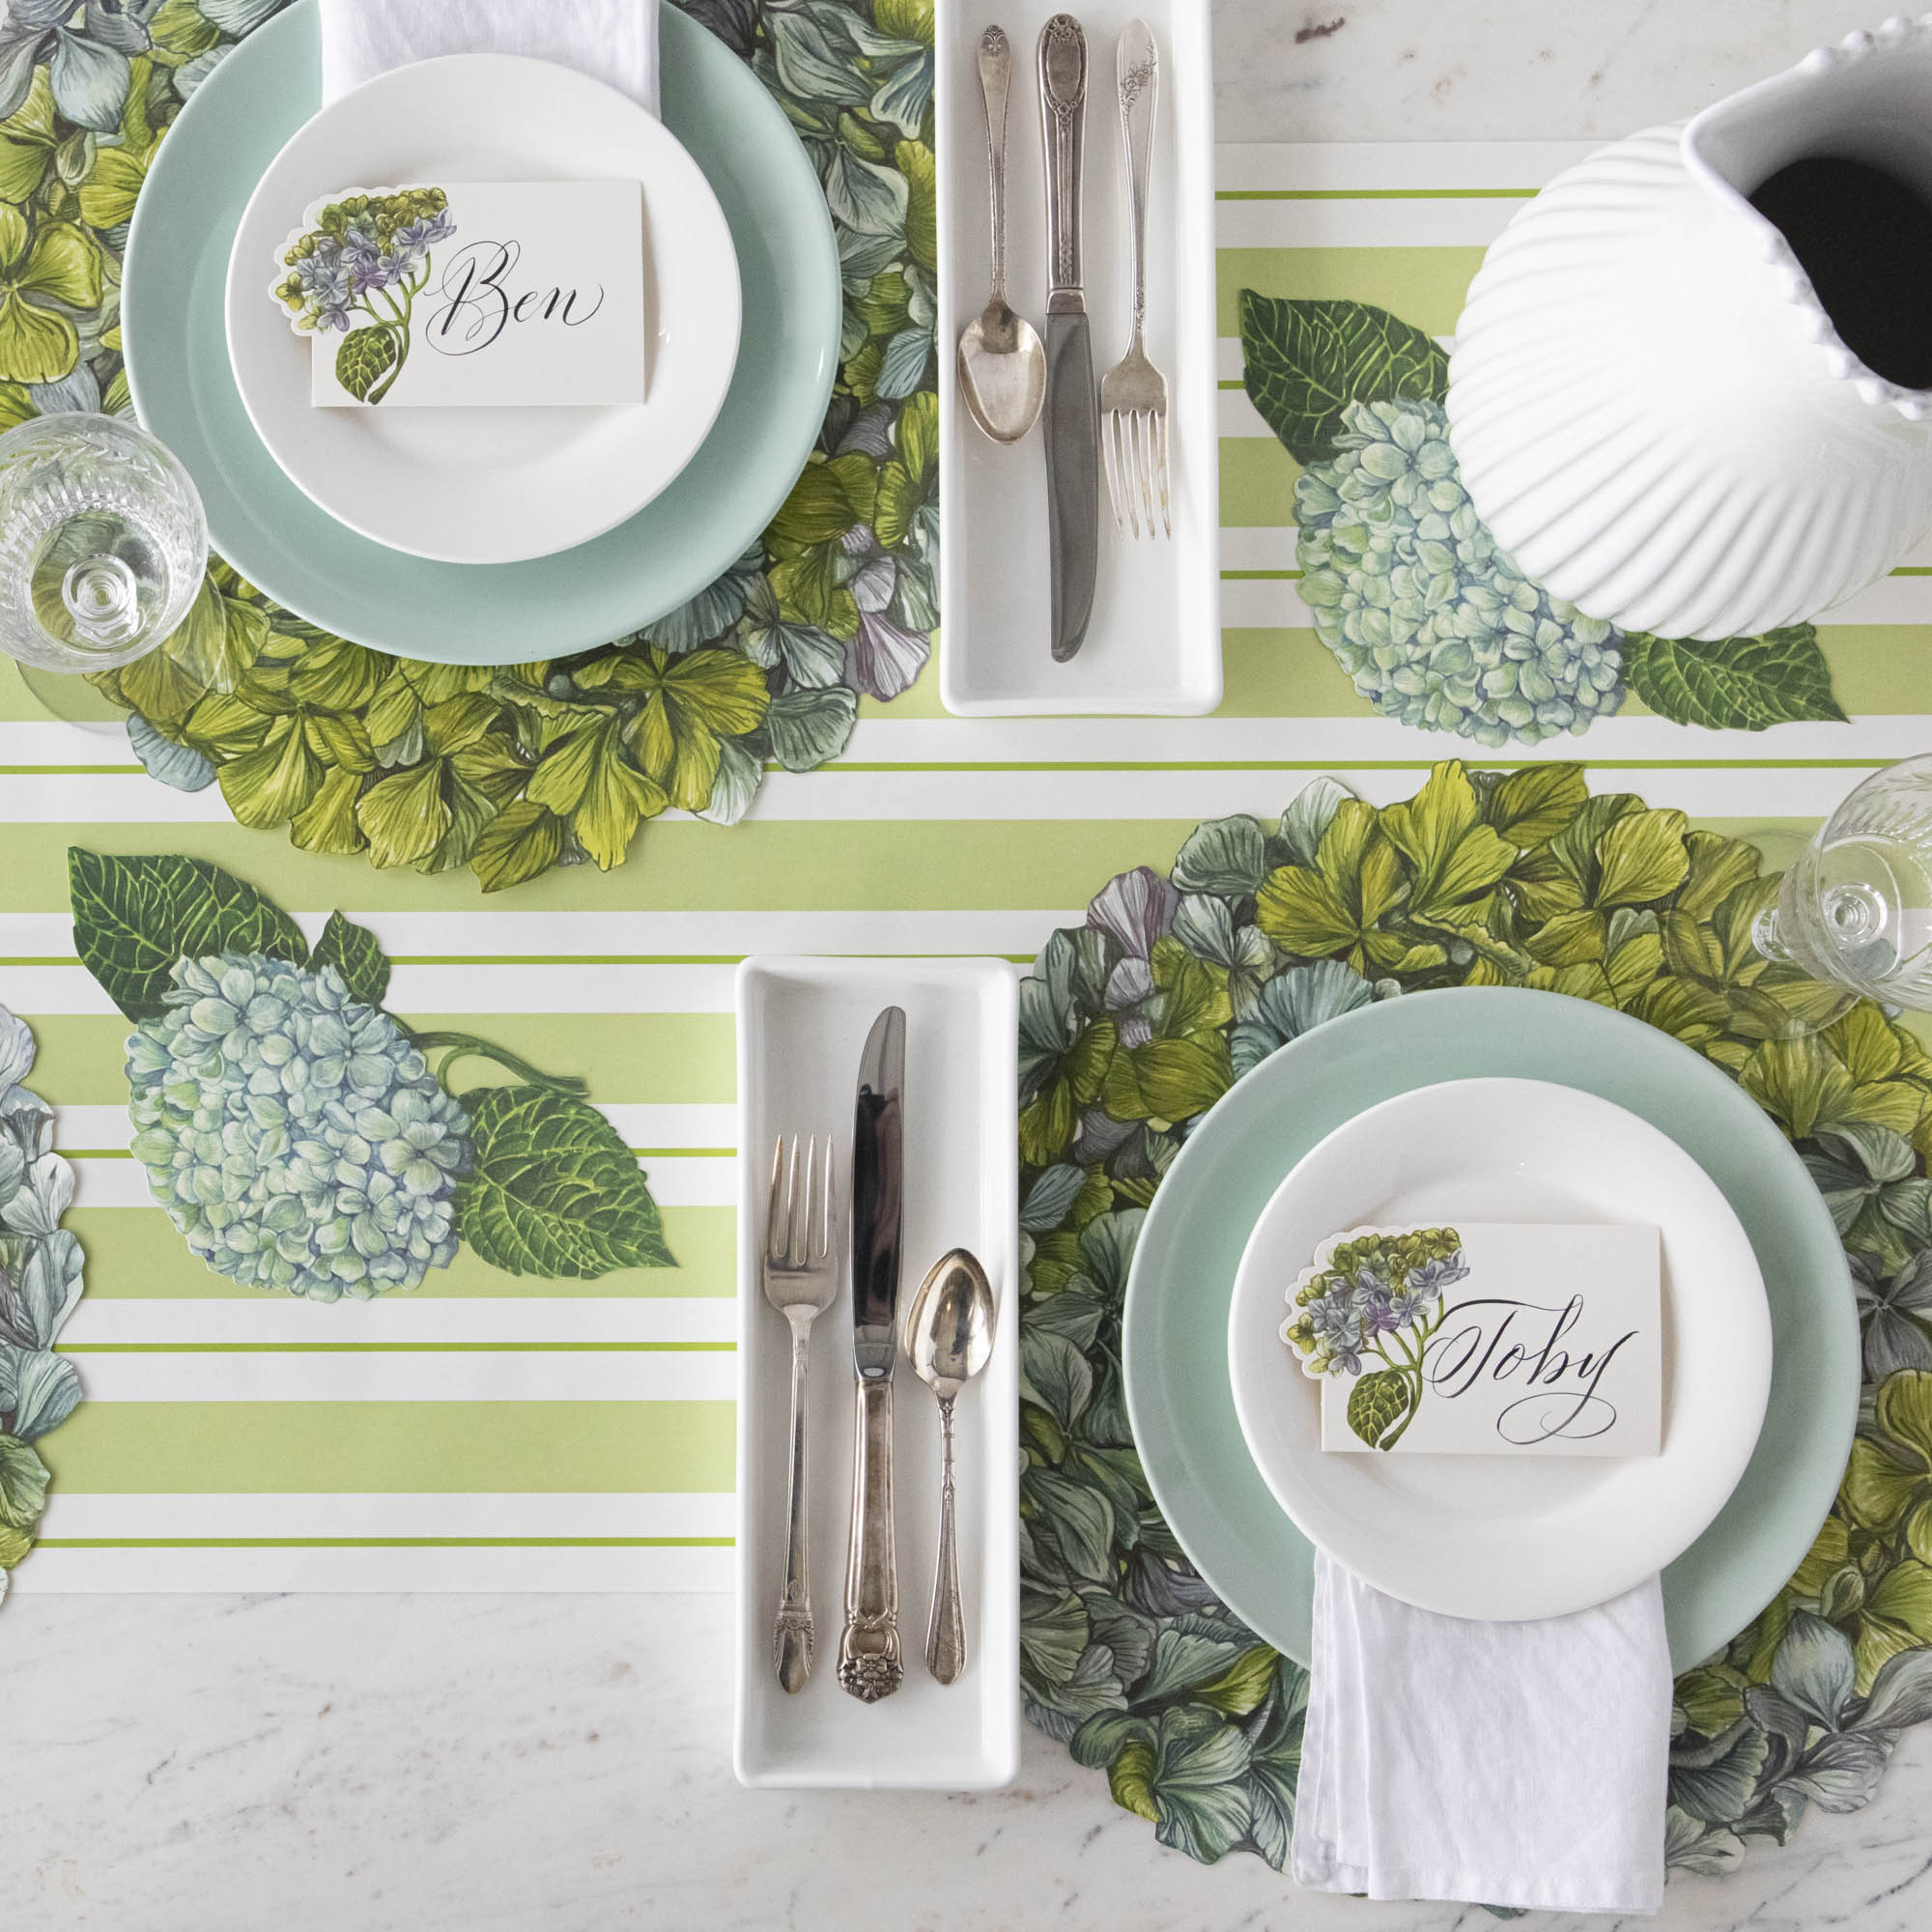 The Die-cut Hydrangea Placemat under an elegant table setting, from above.